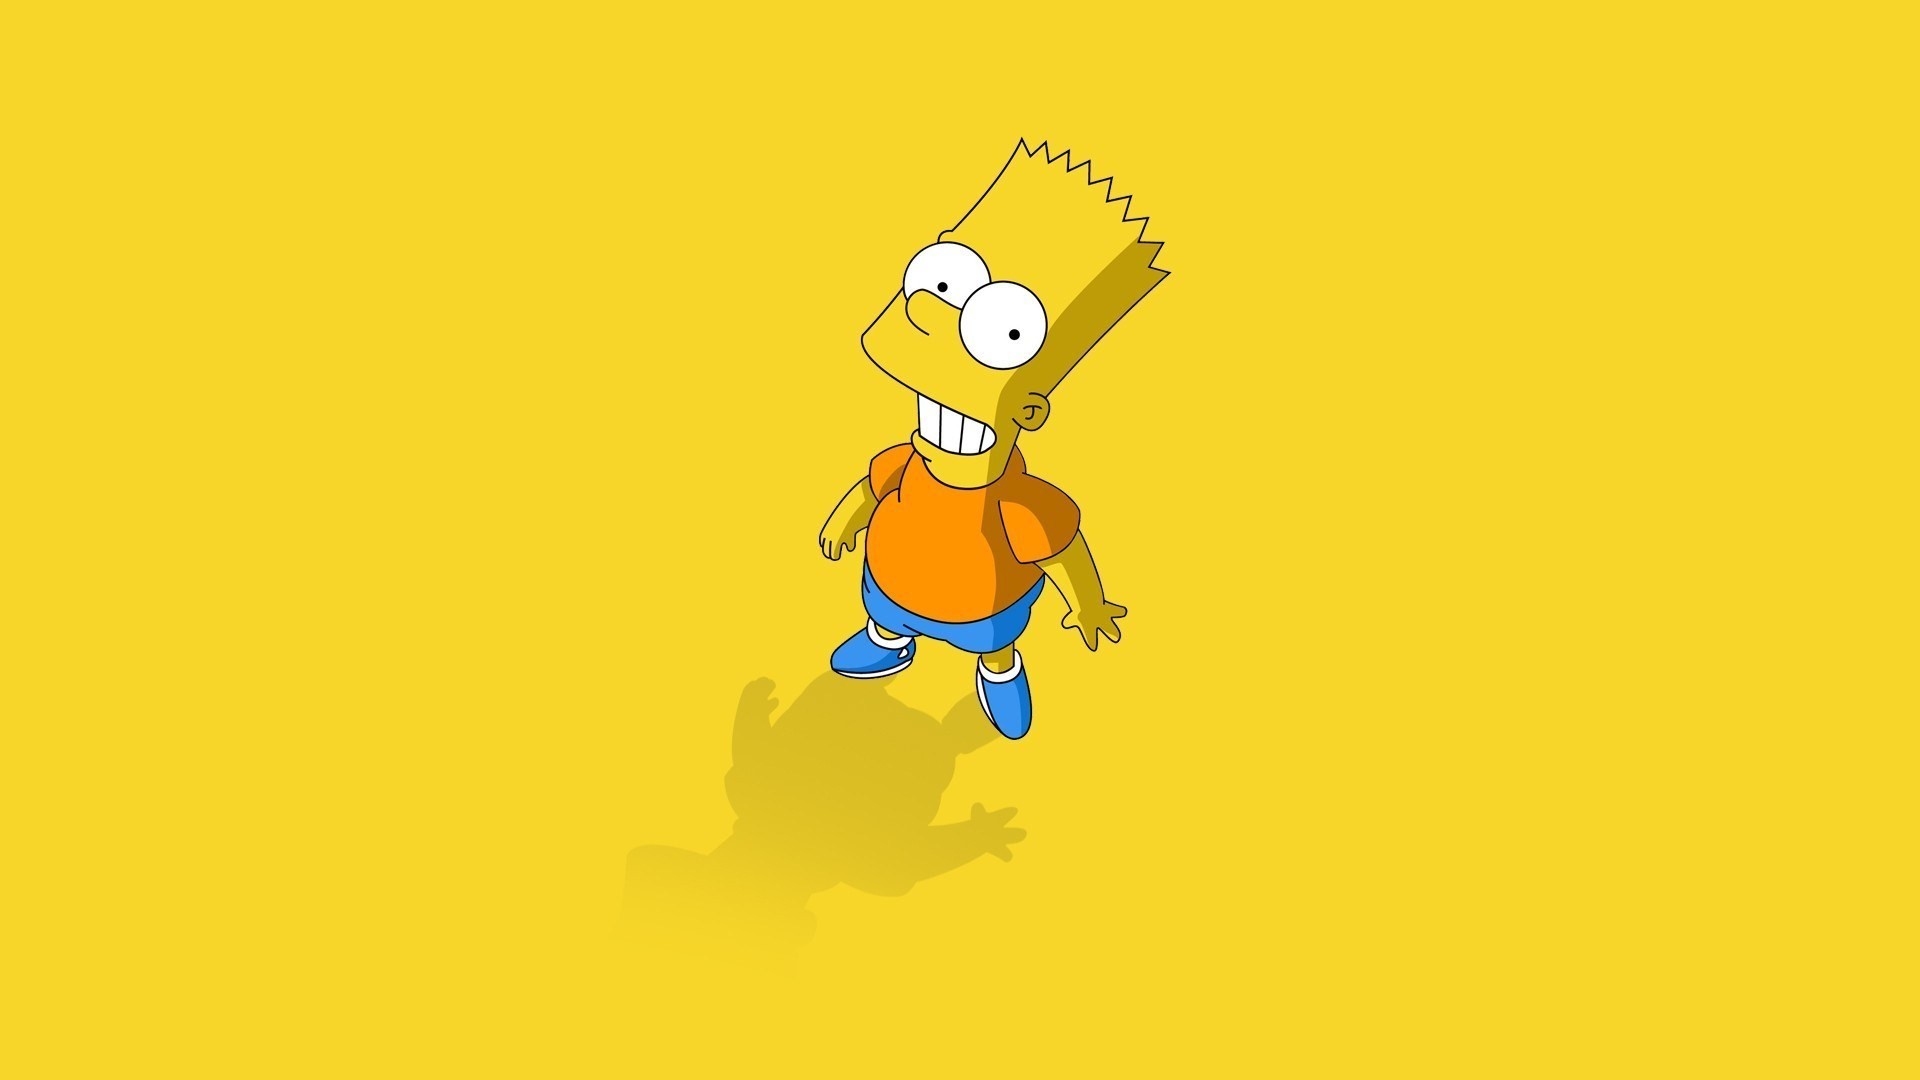 1920x1080 384 The Simpsons HD Wallpapers | Backgrounds - Wallpaper Abyss Homer Simpson  Desktop Wallpapers - Wallpaper Cave ...